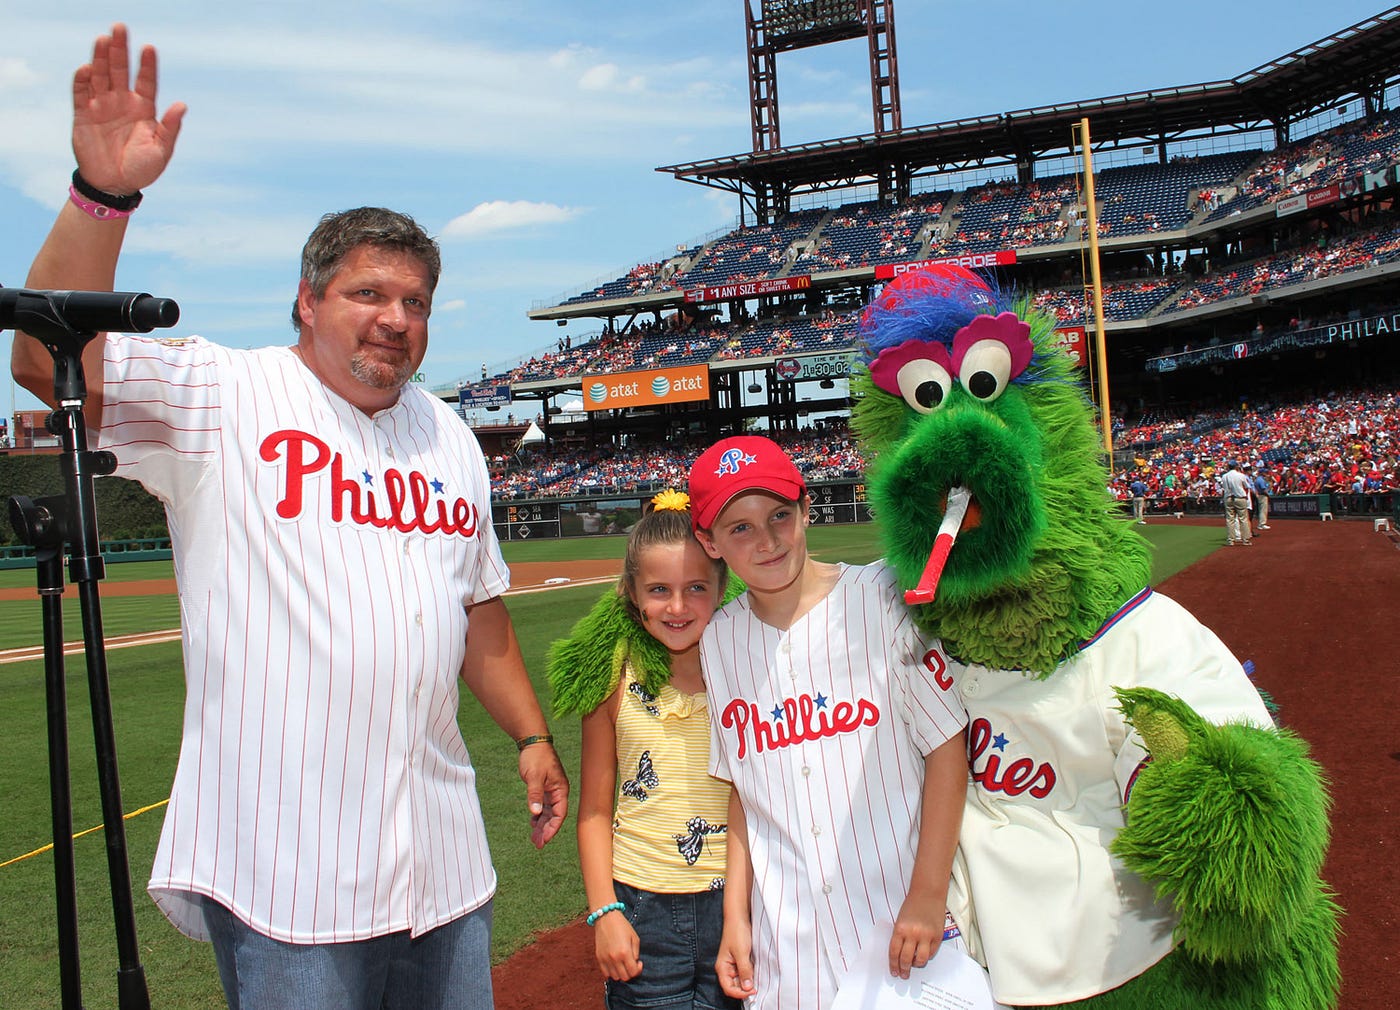 Round of Golf for Three with Phillies Wall of Famer John Kruk